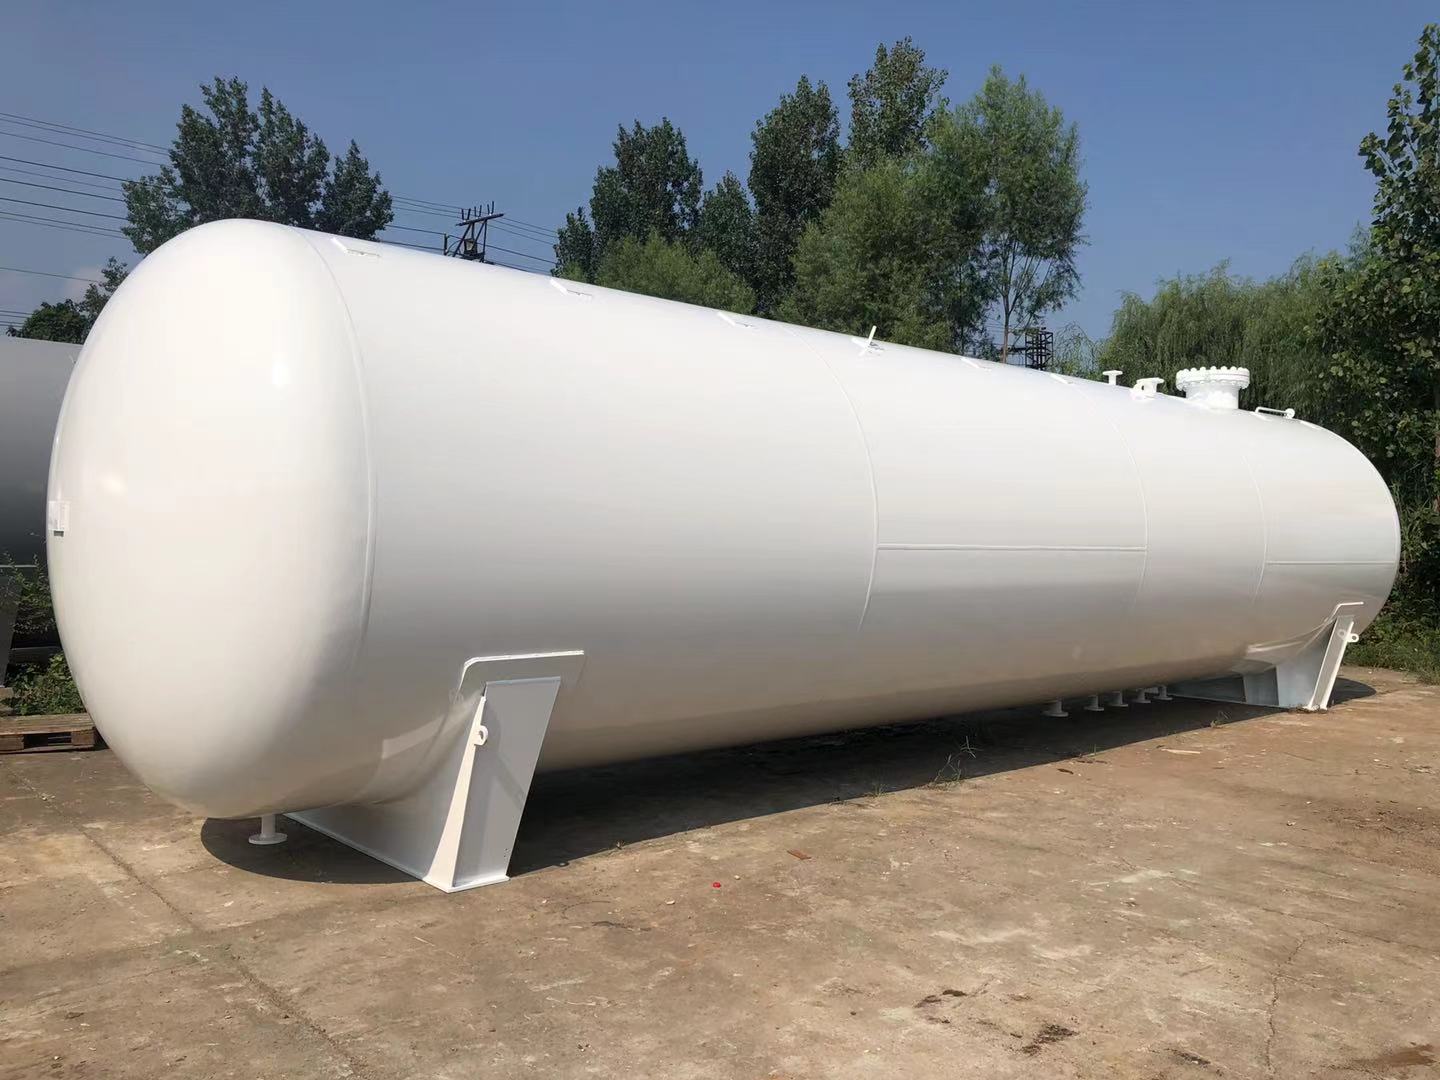 Safe operation of liquefied gas storage tank